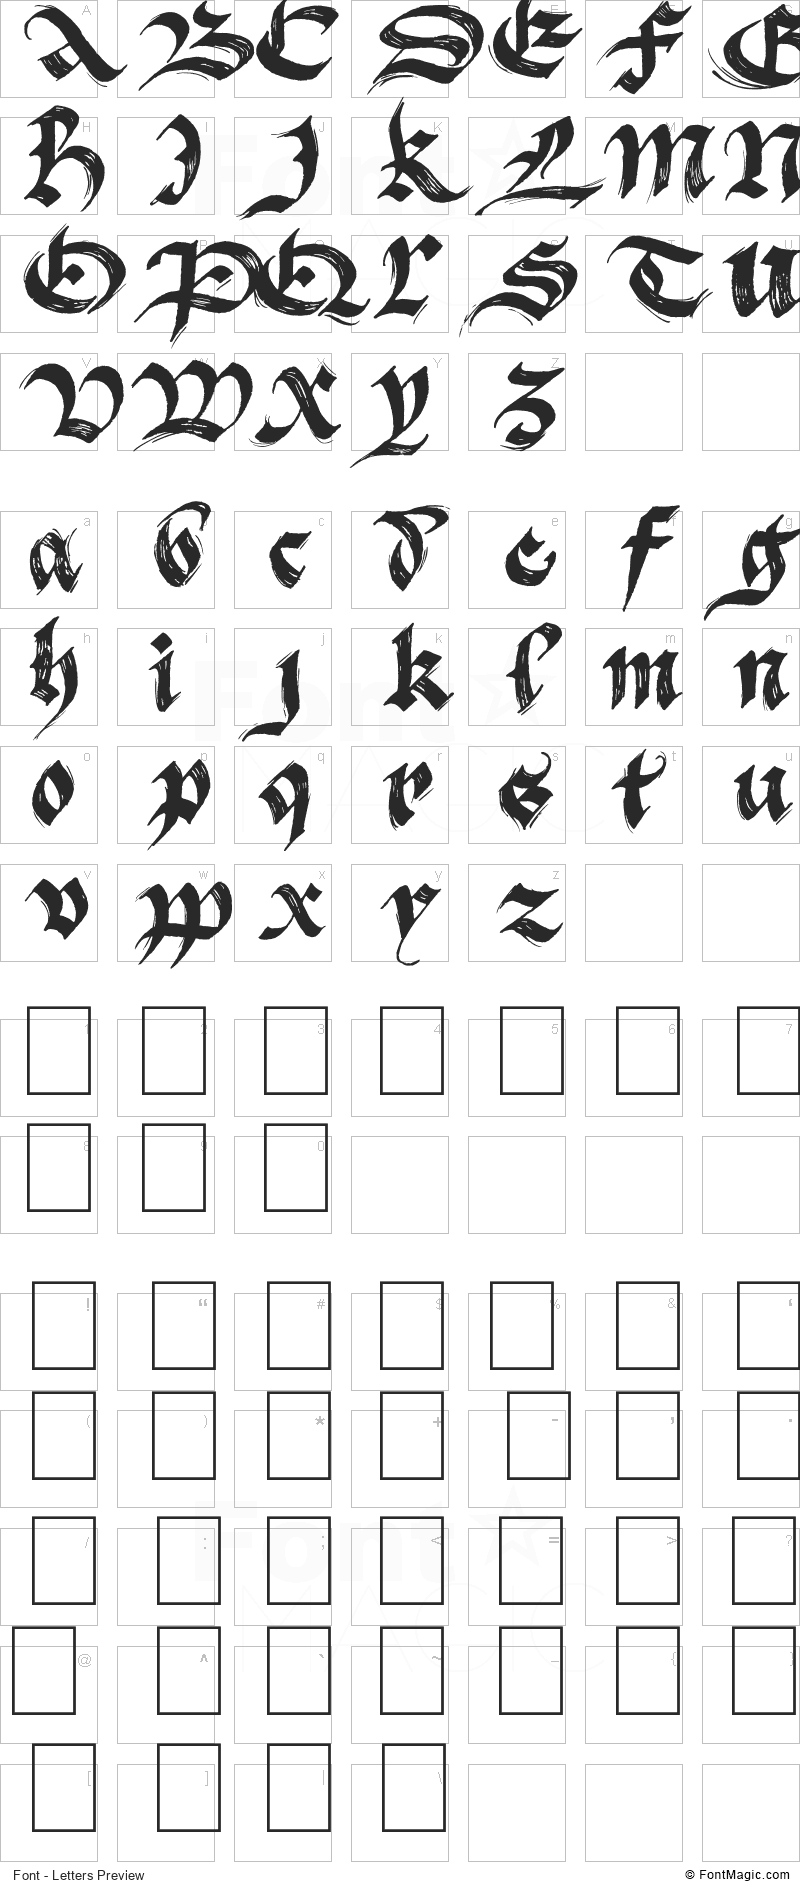 BlackFlag Font - All Latters Preview Chart